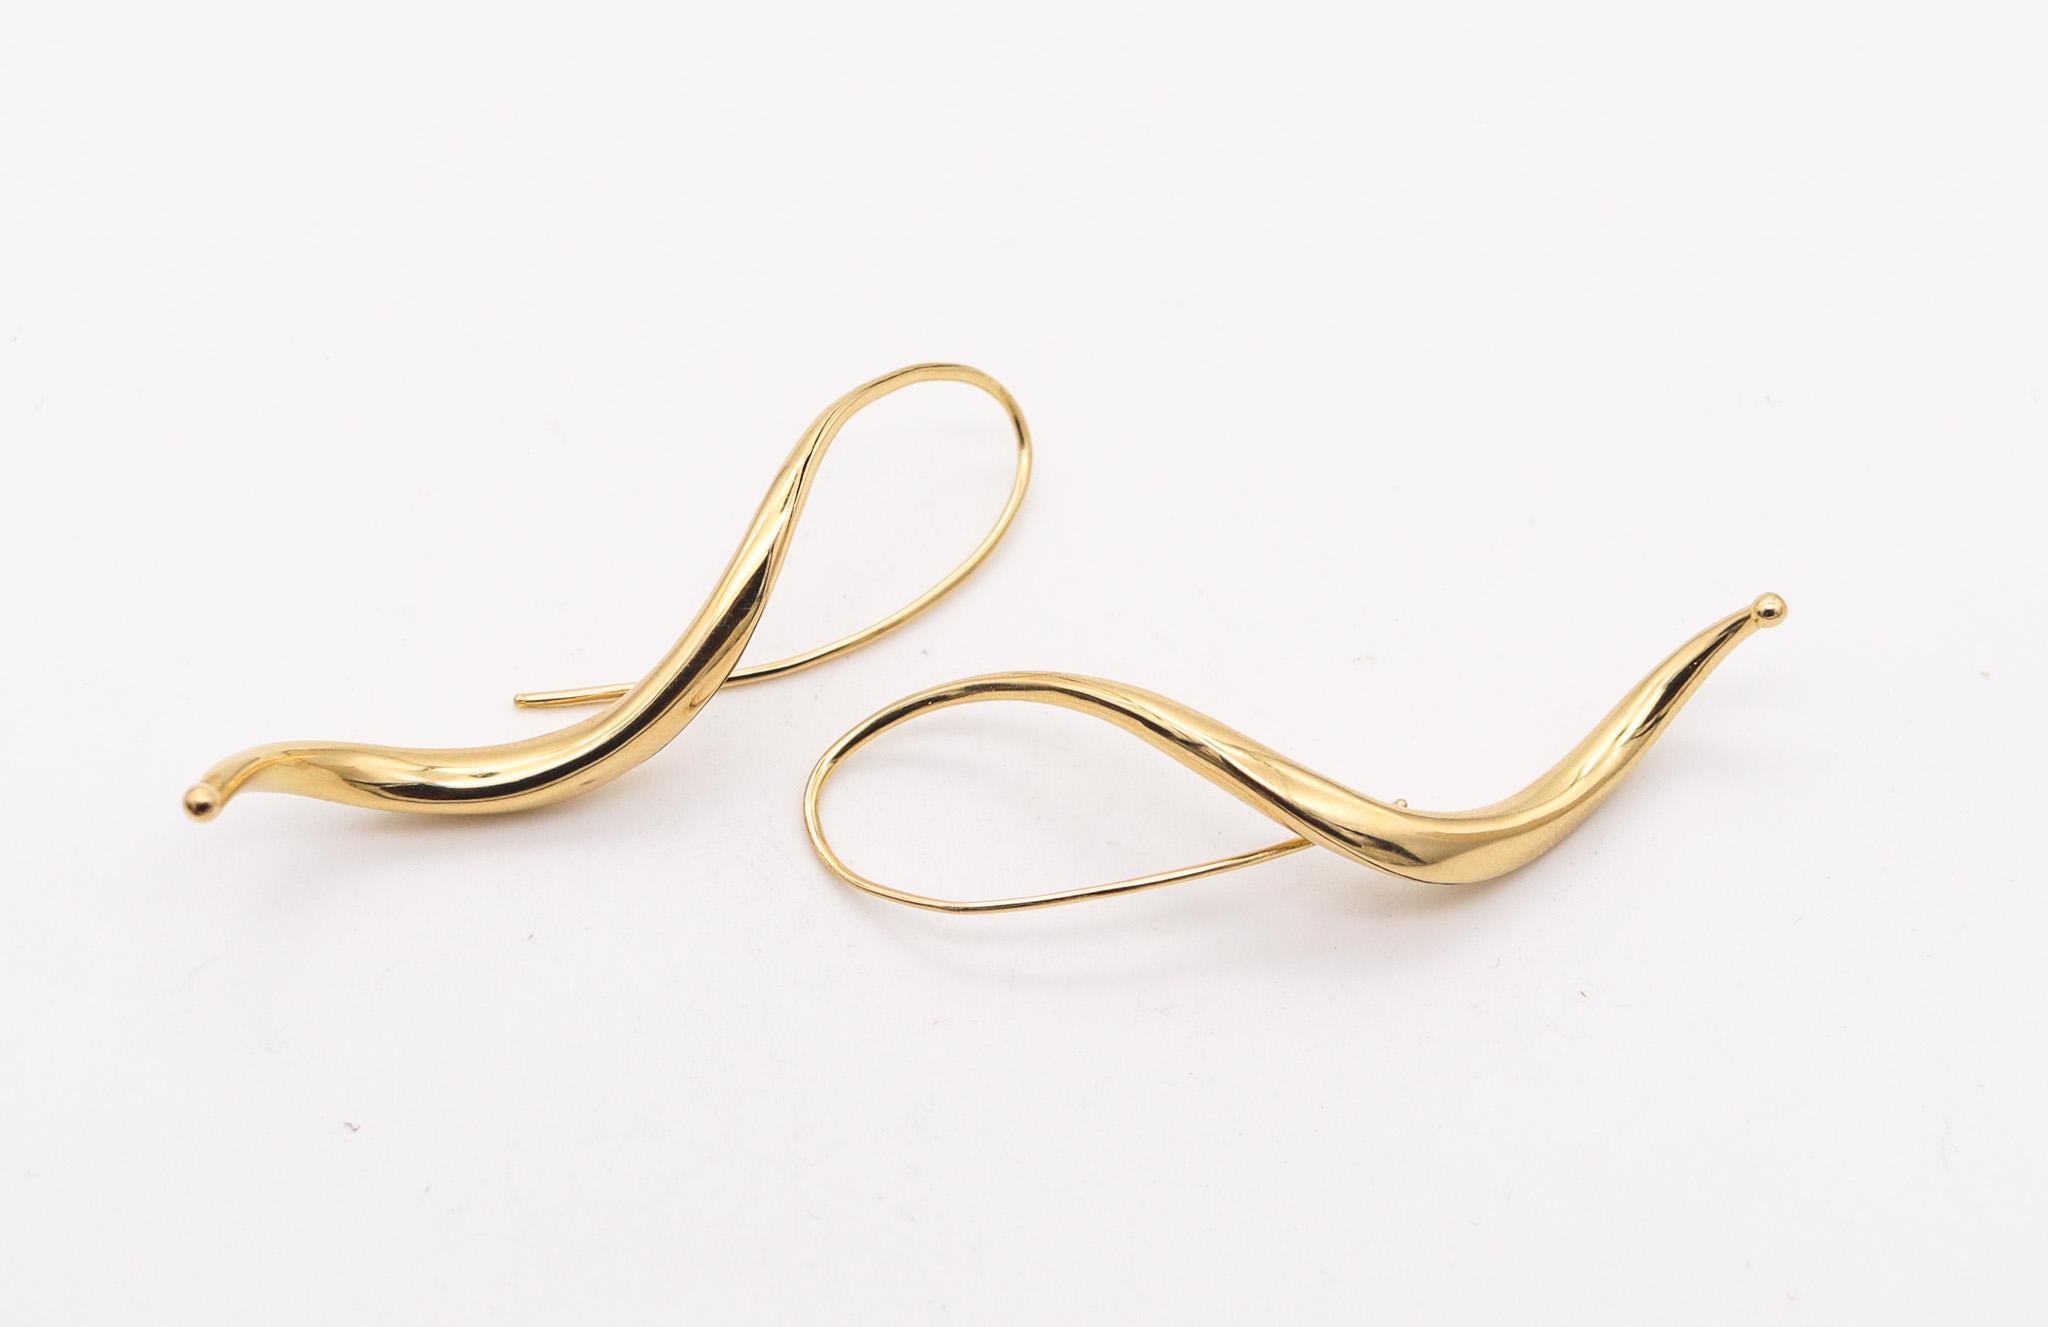 Aerodynamic pair of earrings designed by Michael Good.

A beautiful and elegant pair of aerodynamic dangle earrings, created by the American goldsmith and artist jeweler Michael Good, back in the 1985. These earrings has been crafted with free